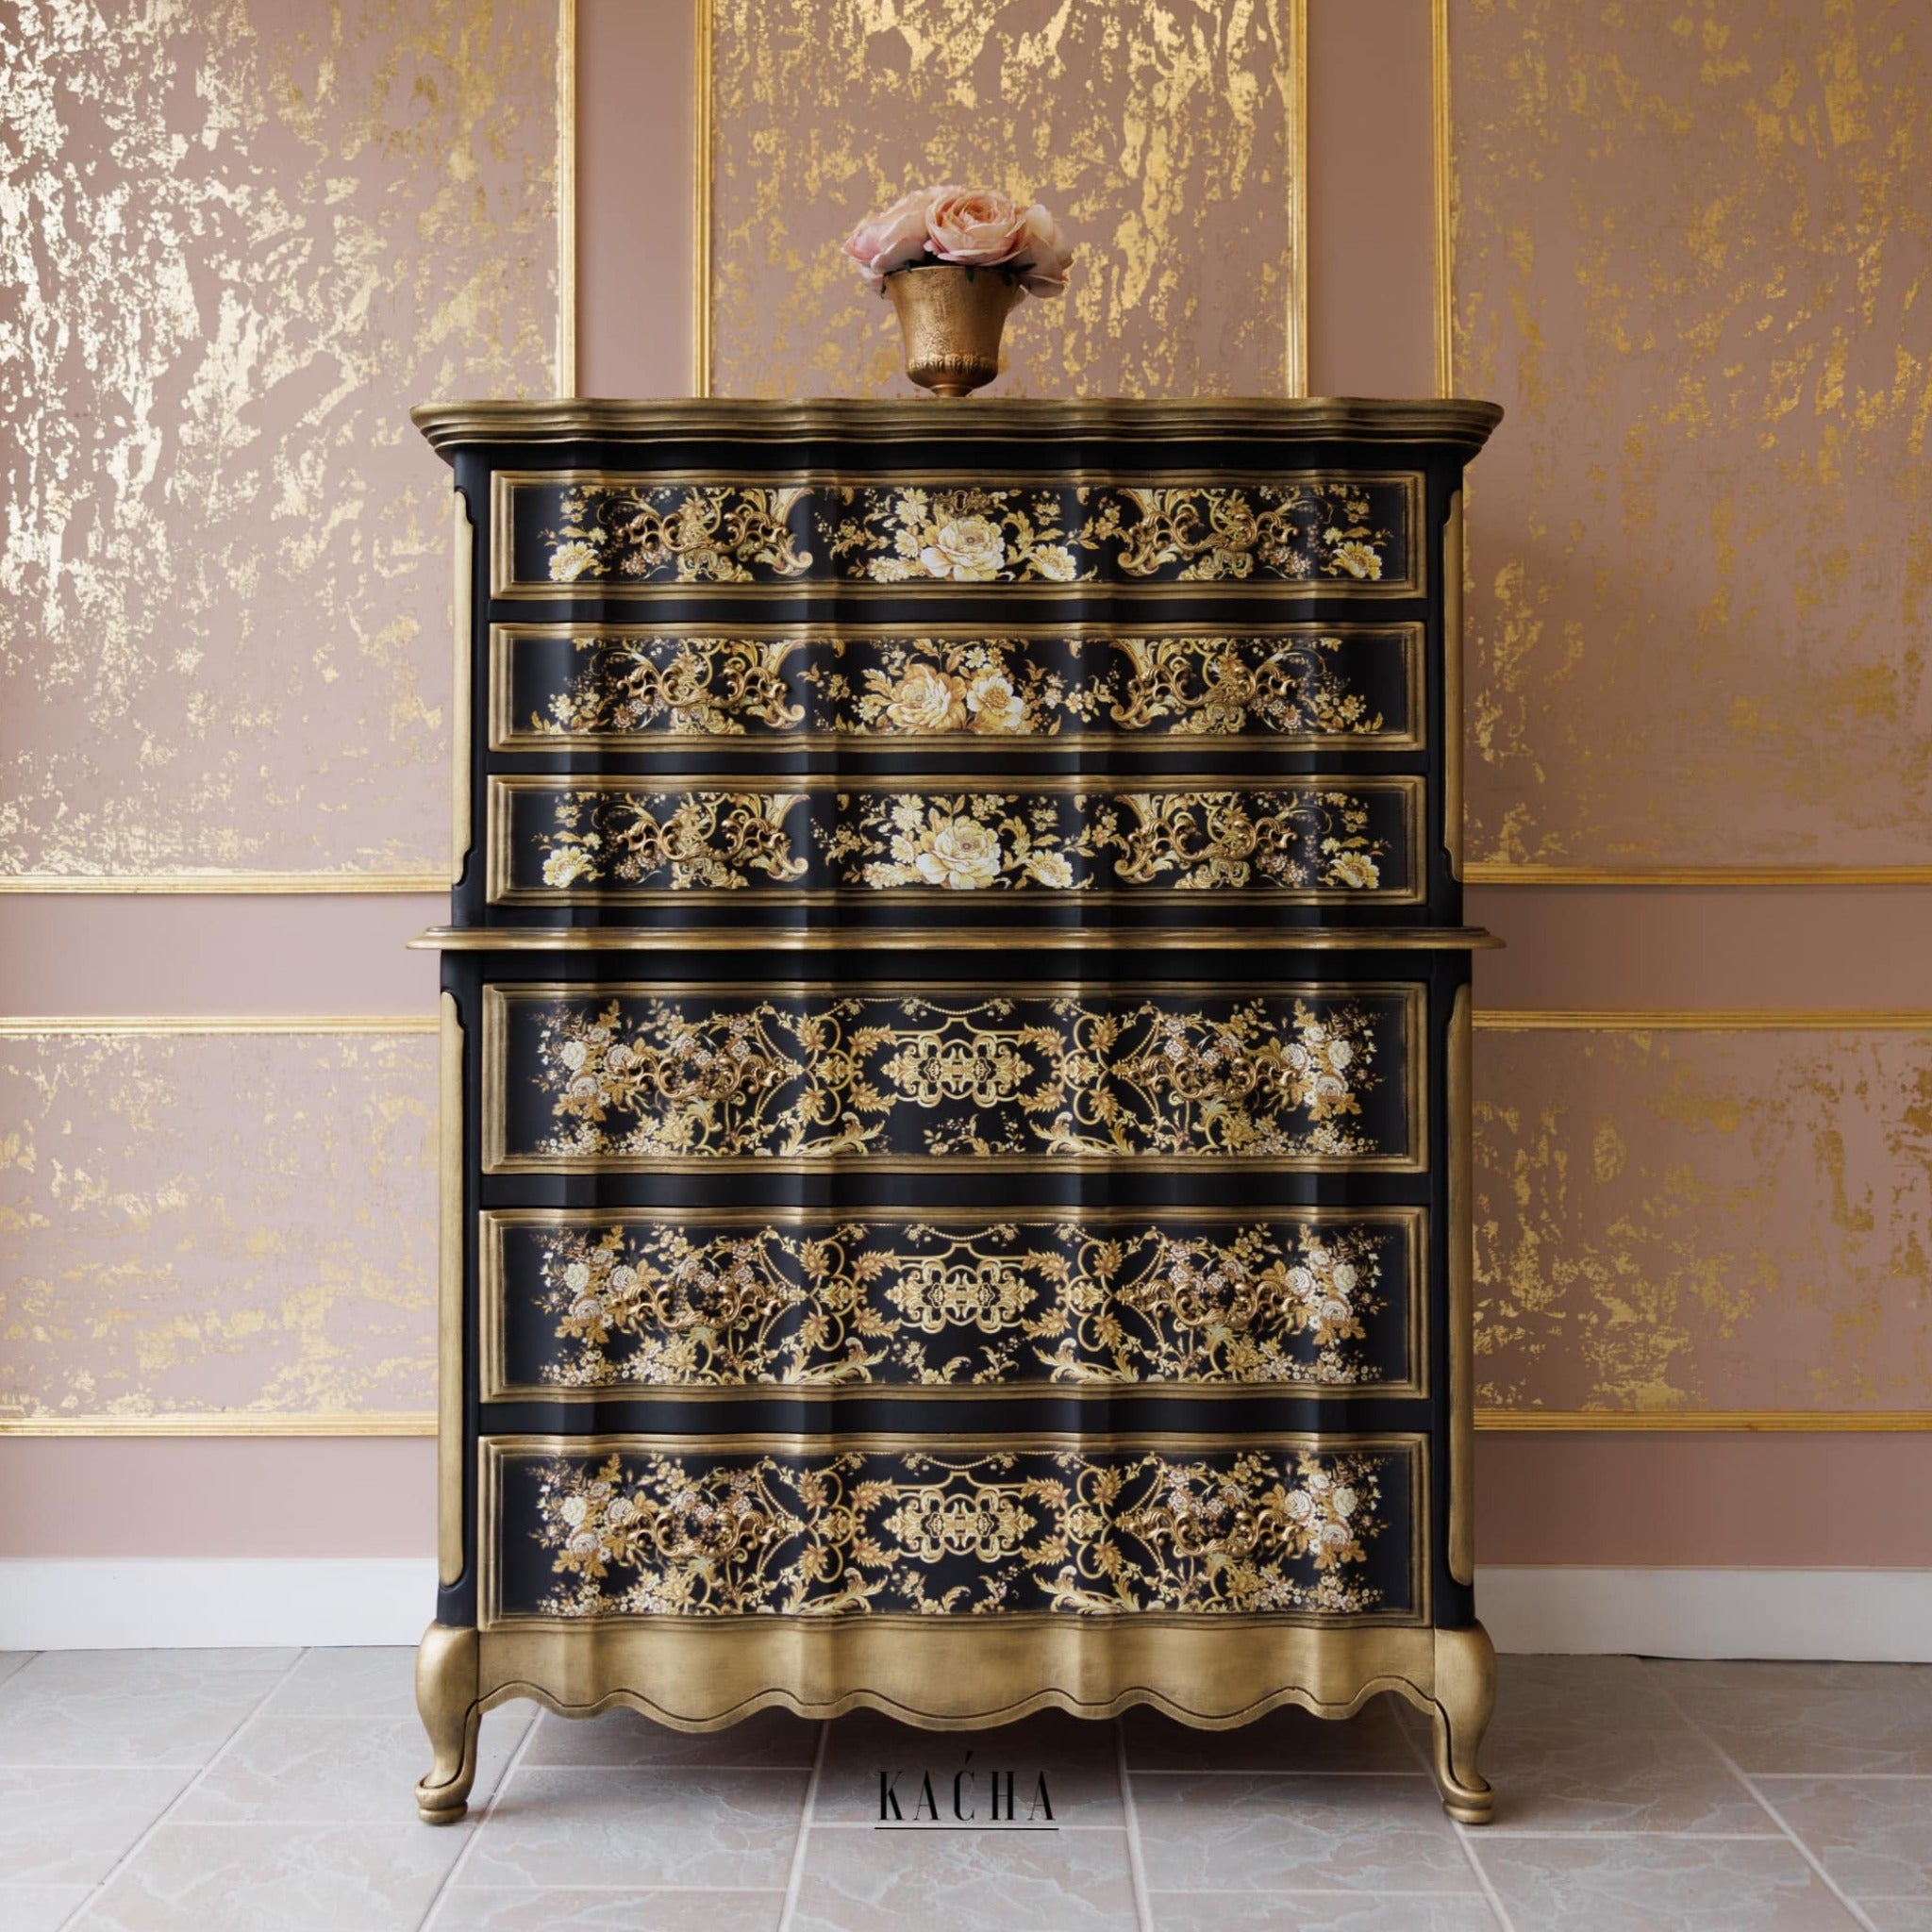 A vintage chest dresser refurbished by Kacha is painted black with gold accents and features ReDesign with Prima's Kacha Orleans transfer on the drawers.